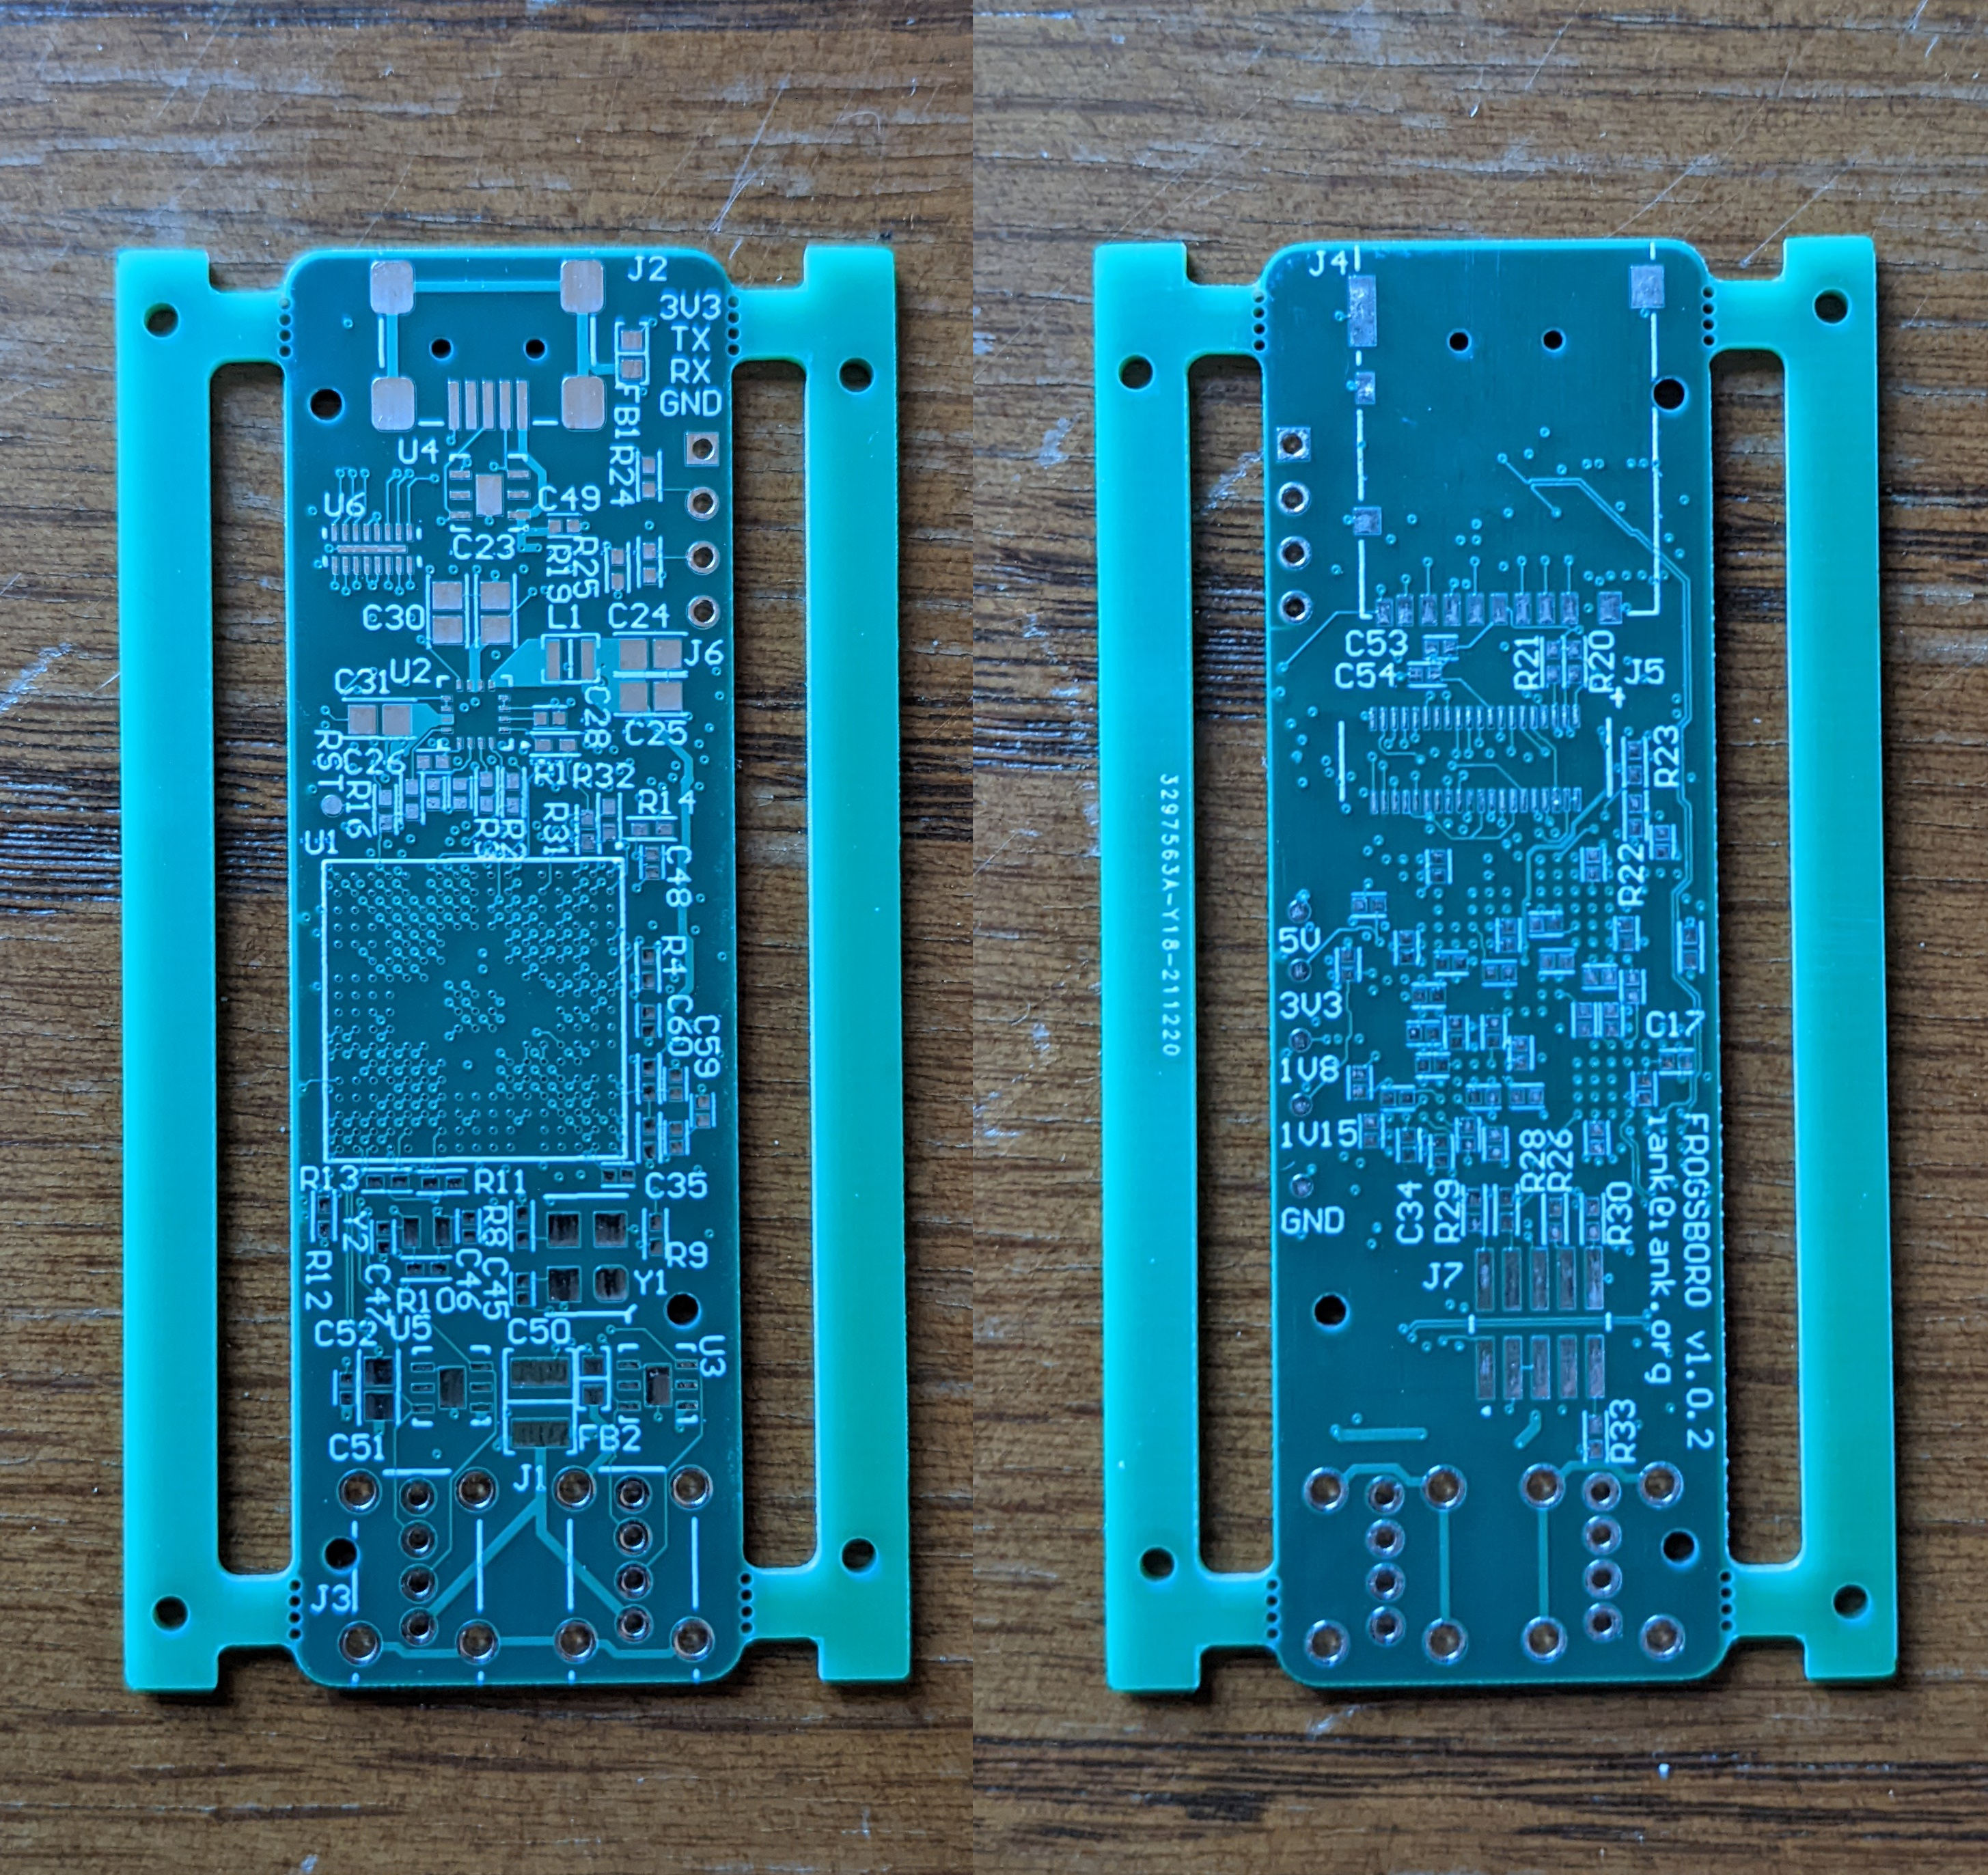 Two blank PCBs side-by-side. The PCBs have rails on either side that are attached by thin tabs. The tabs have mouse bites drilled into them and can be broken away.